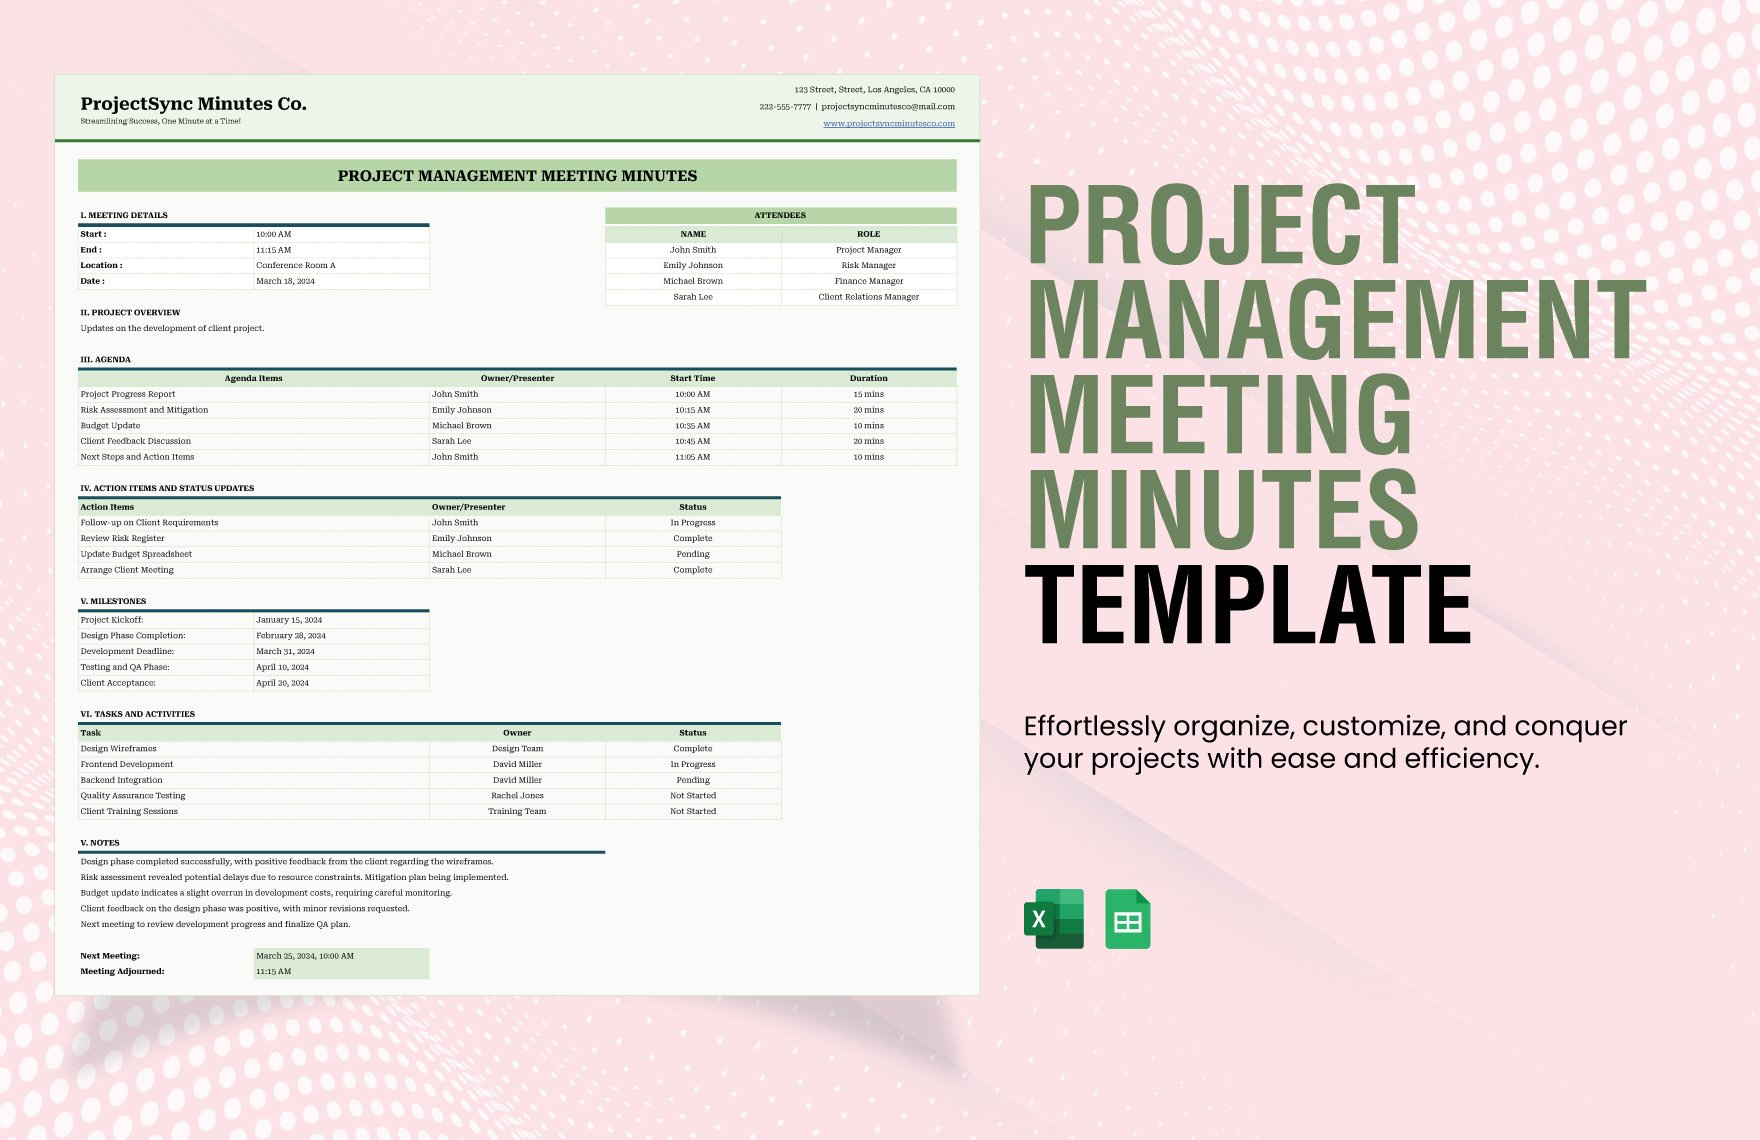 Project Management Meeting Minutes Template in Excel, Google Sheets